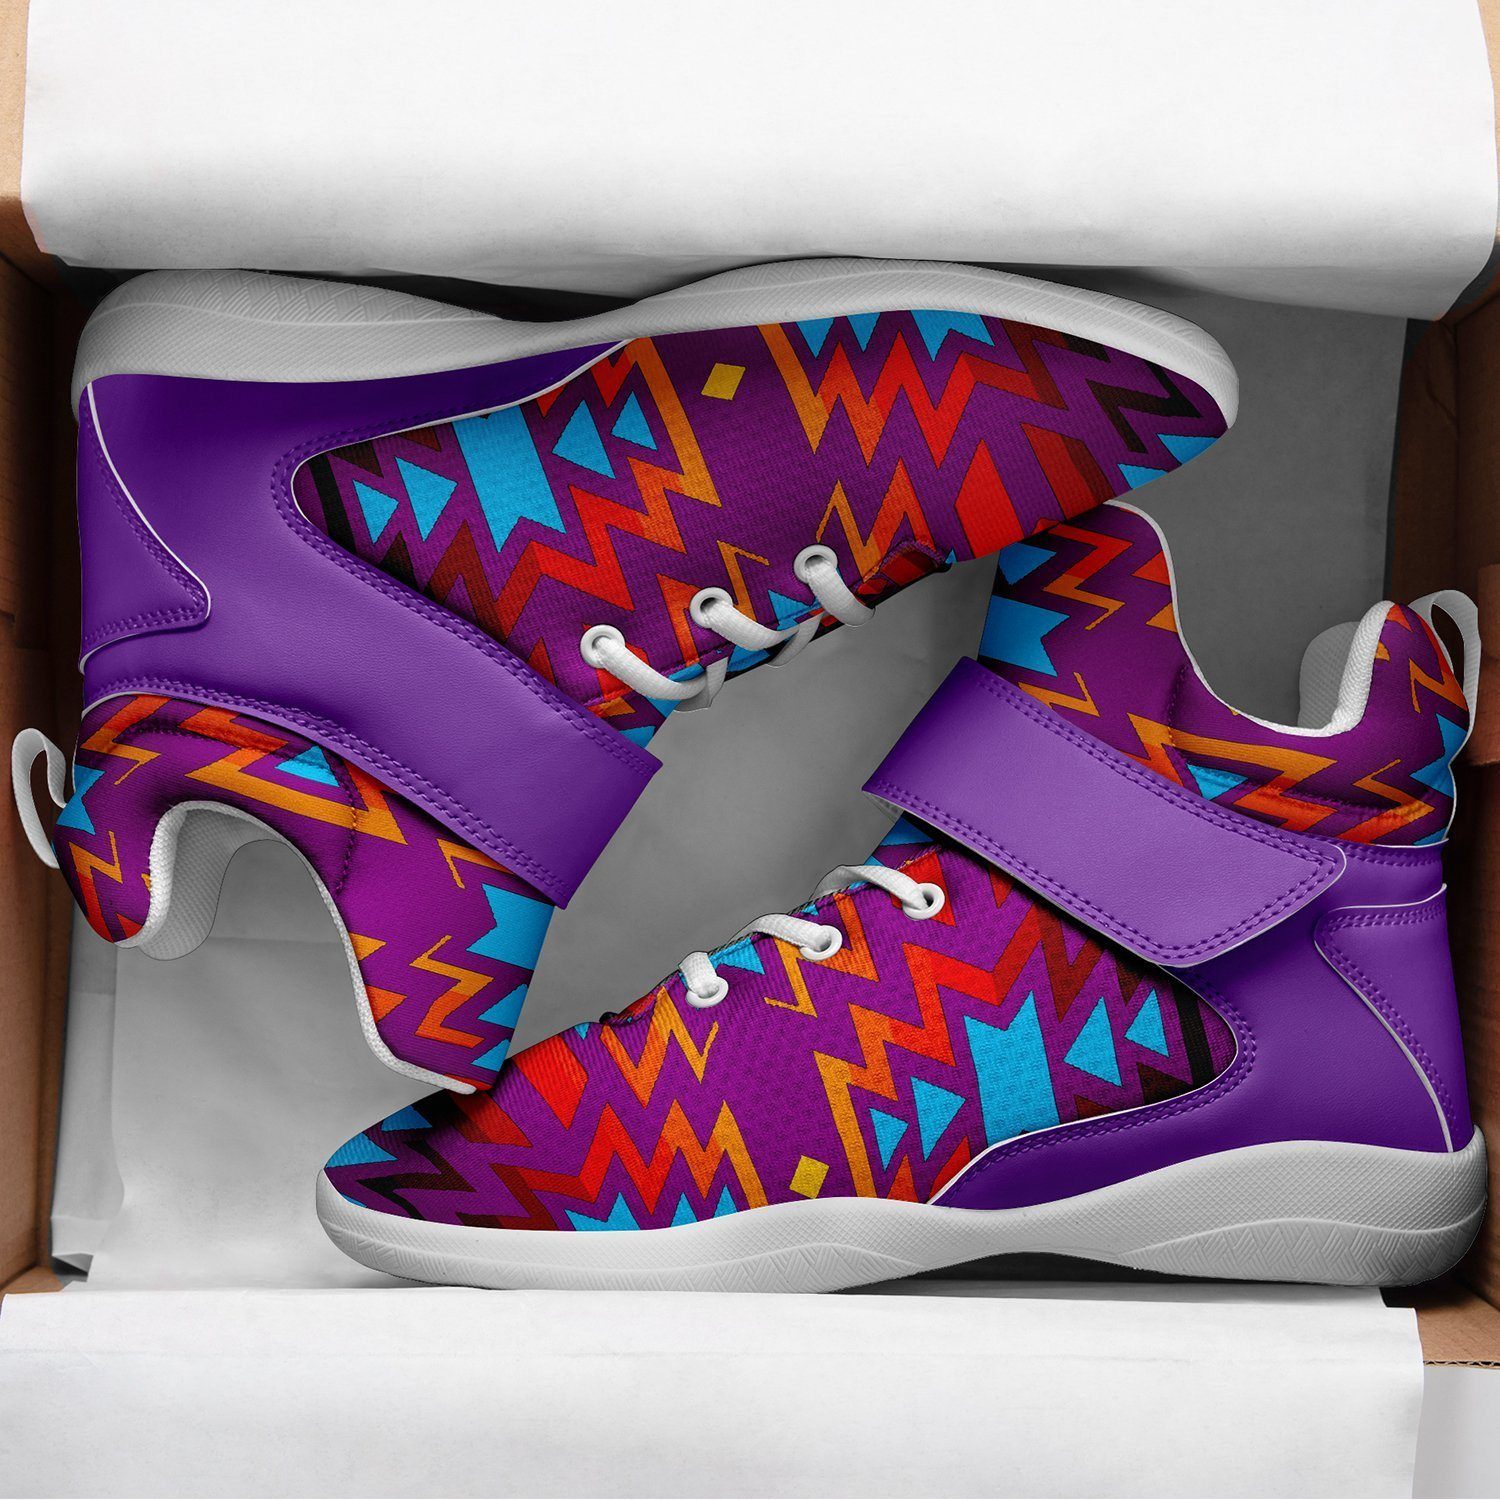 Fire Colors and Turquoise Purple Ipottaa Basketball / Sport High Top Shoes - White Sole 49 Dzine 